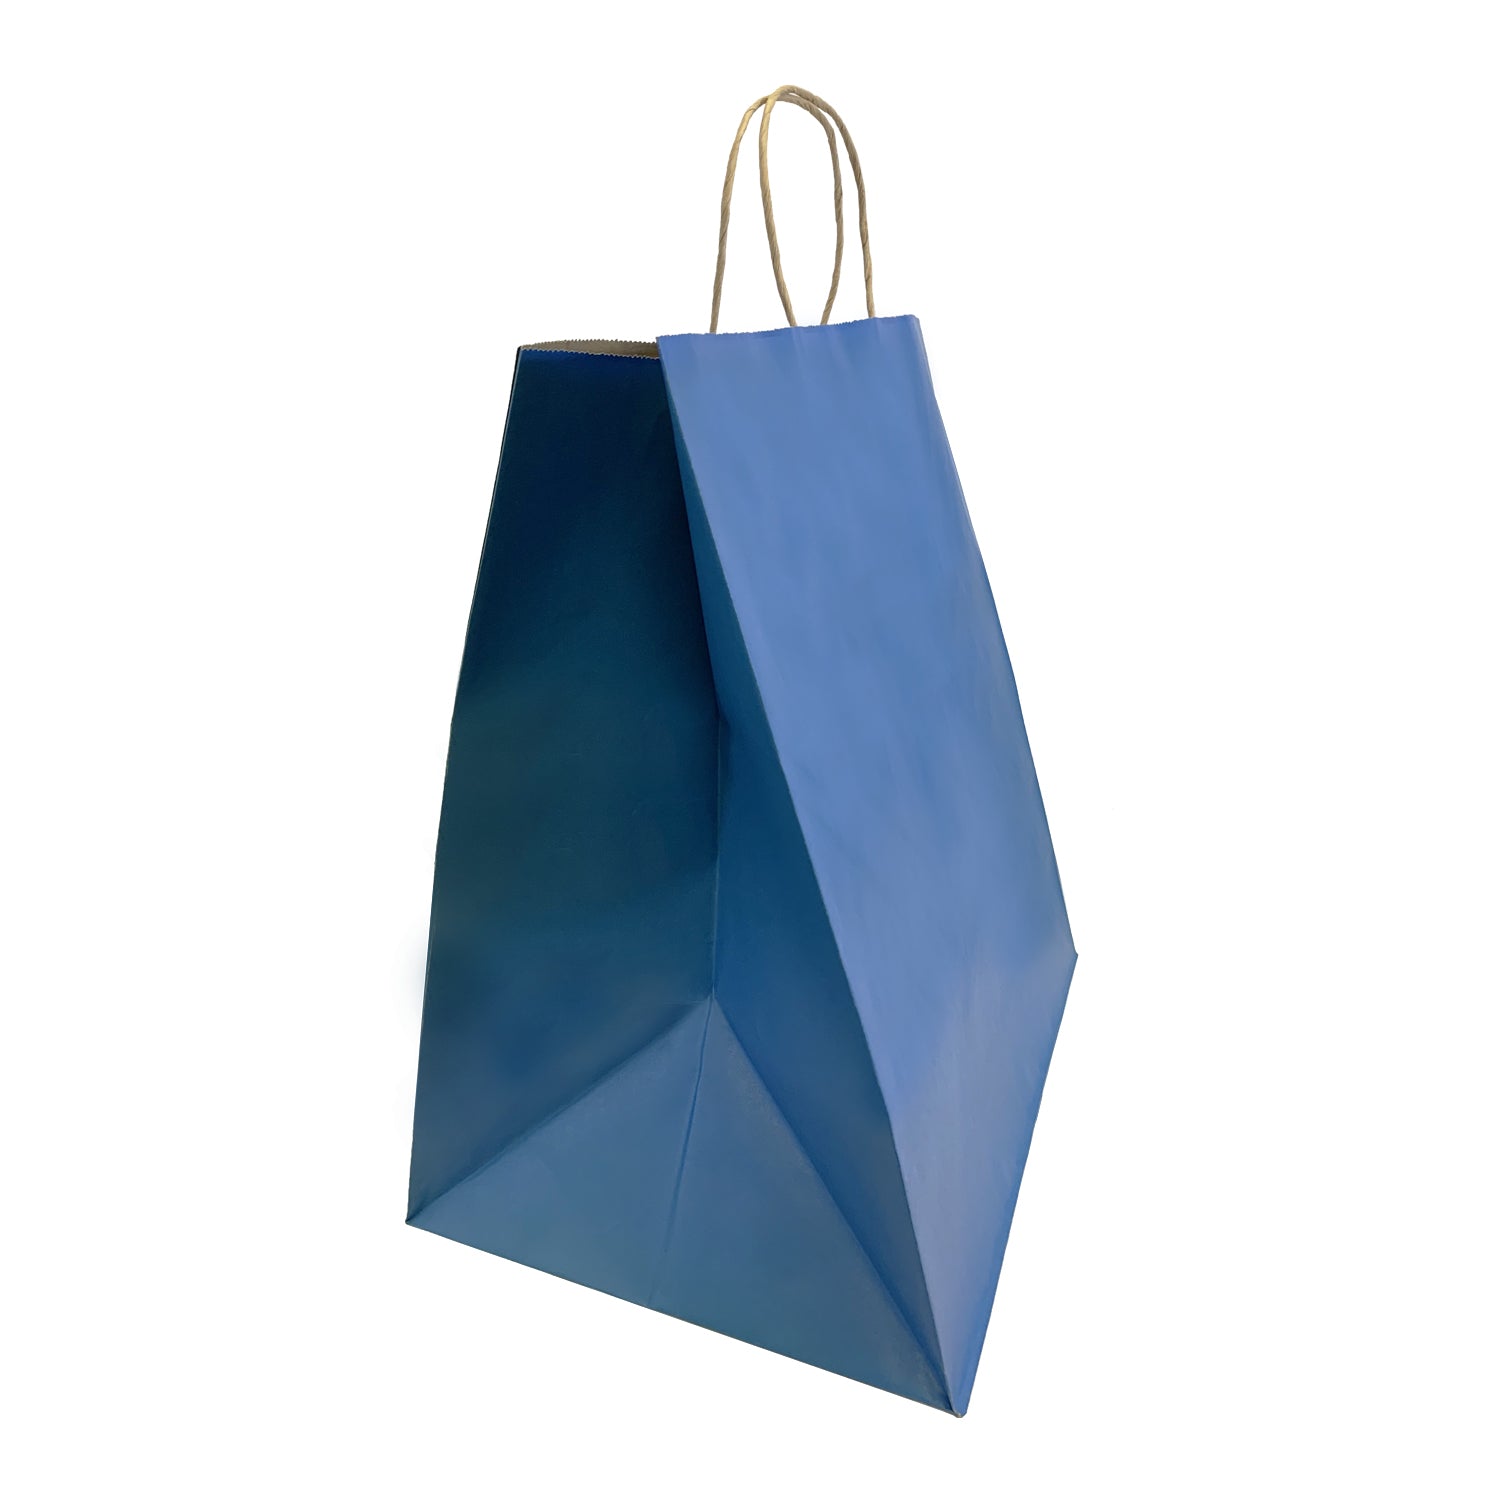 150 Pcs, Super Royal, 14x10x15.75 inches, Blue Kraft Paper Bags, with Twisted Handle